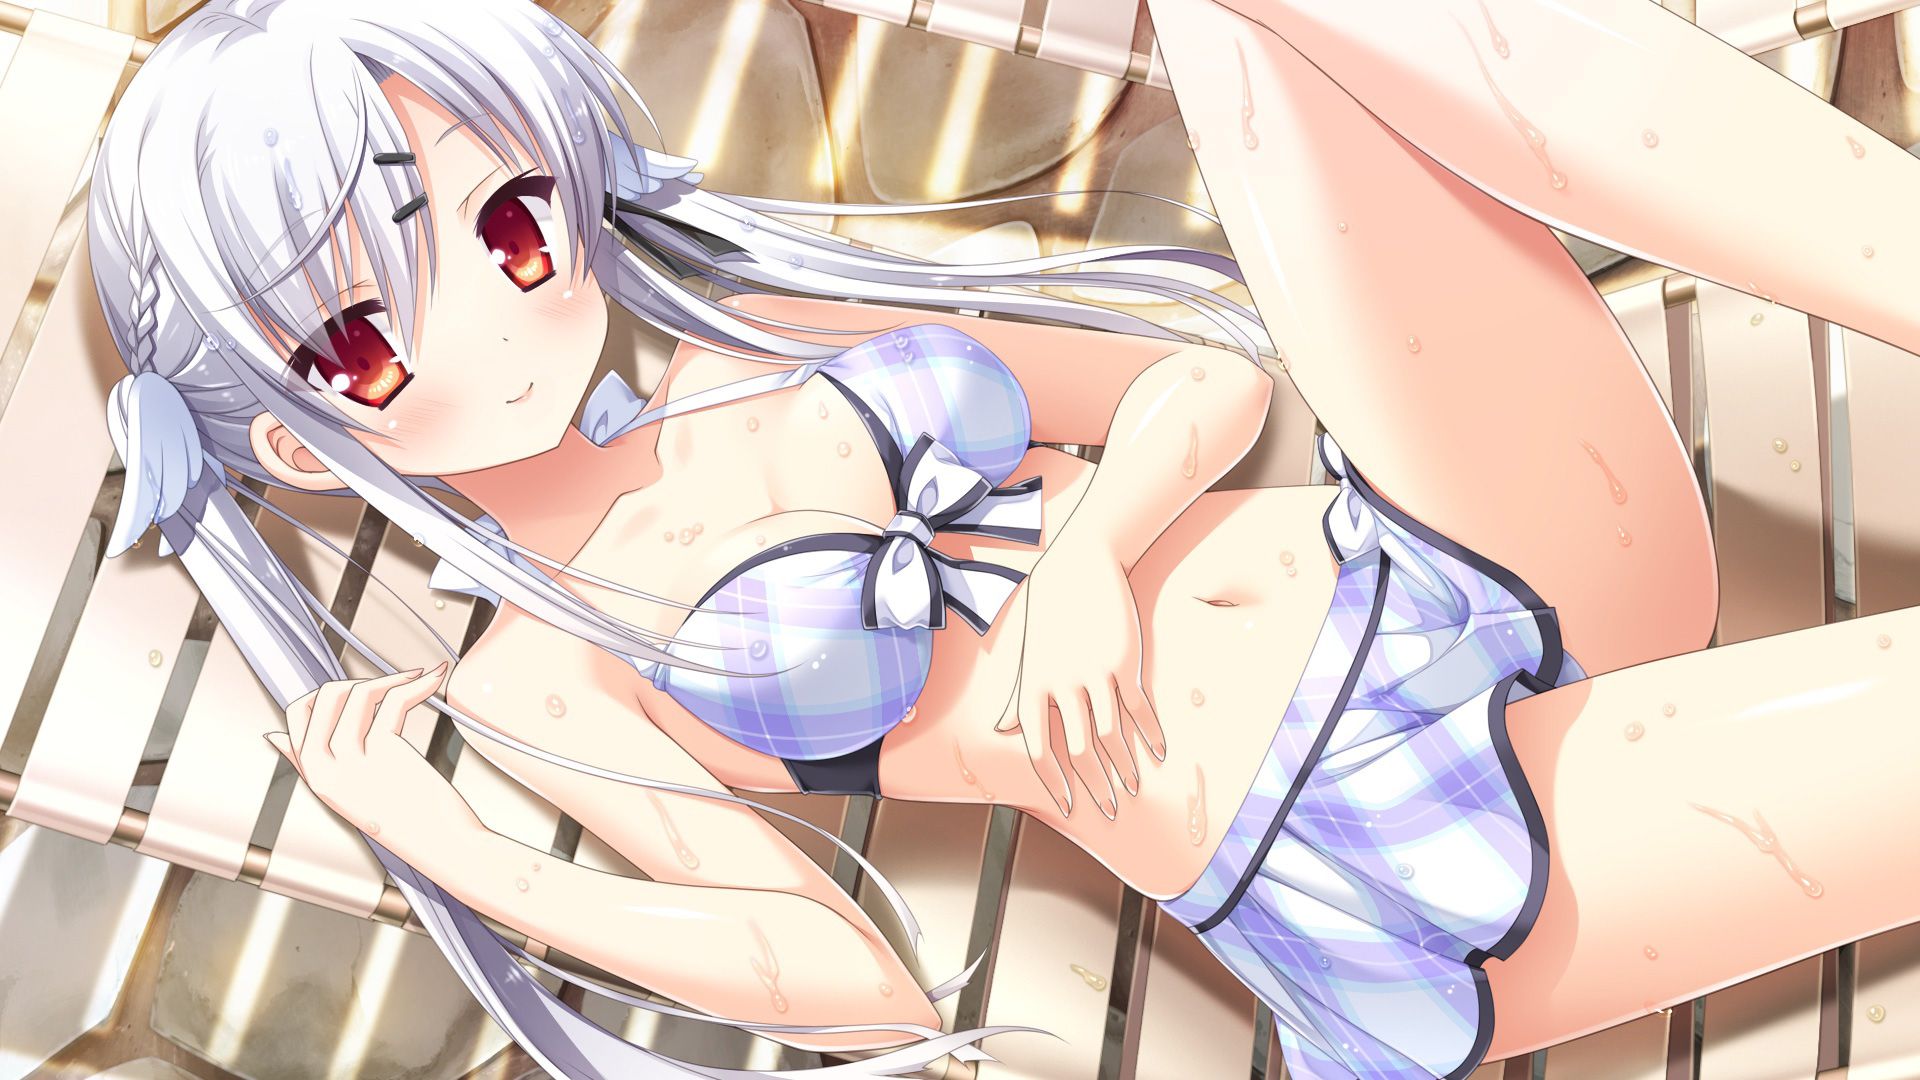 Secondary image of a silver-haired girl that 4 50 photos [Ero/non-erotic] 1